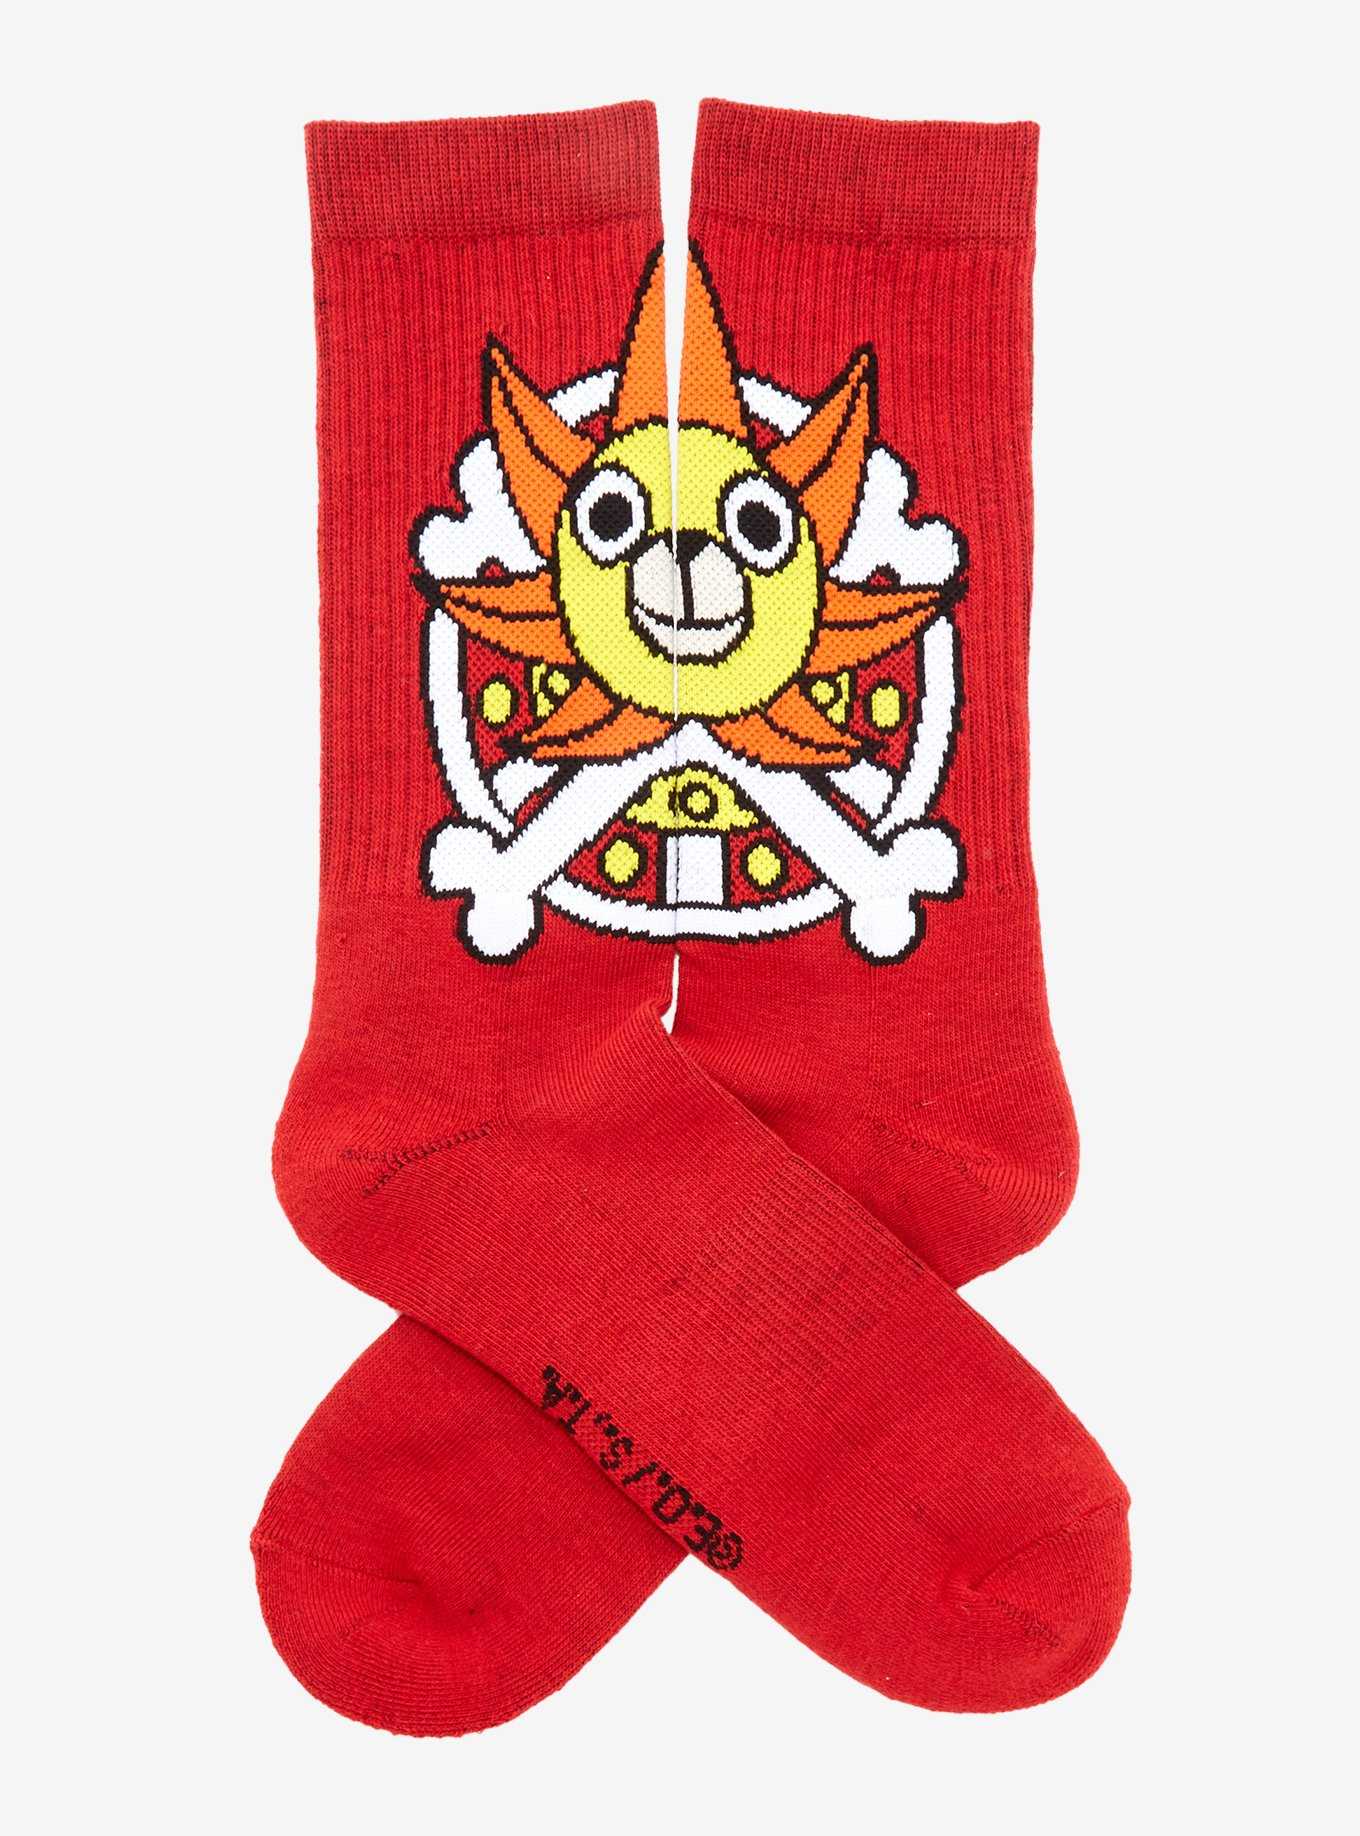 One Piece Thousand Sunny Crew Socks - BoxLunch Exclusive , , hi-res